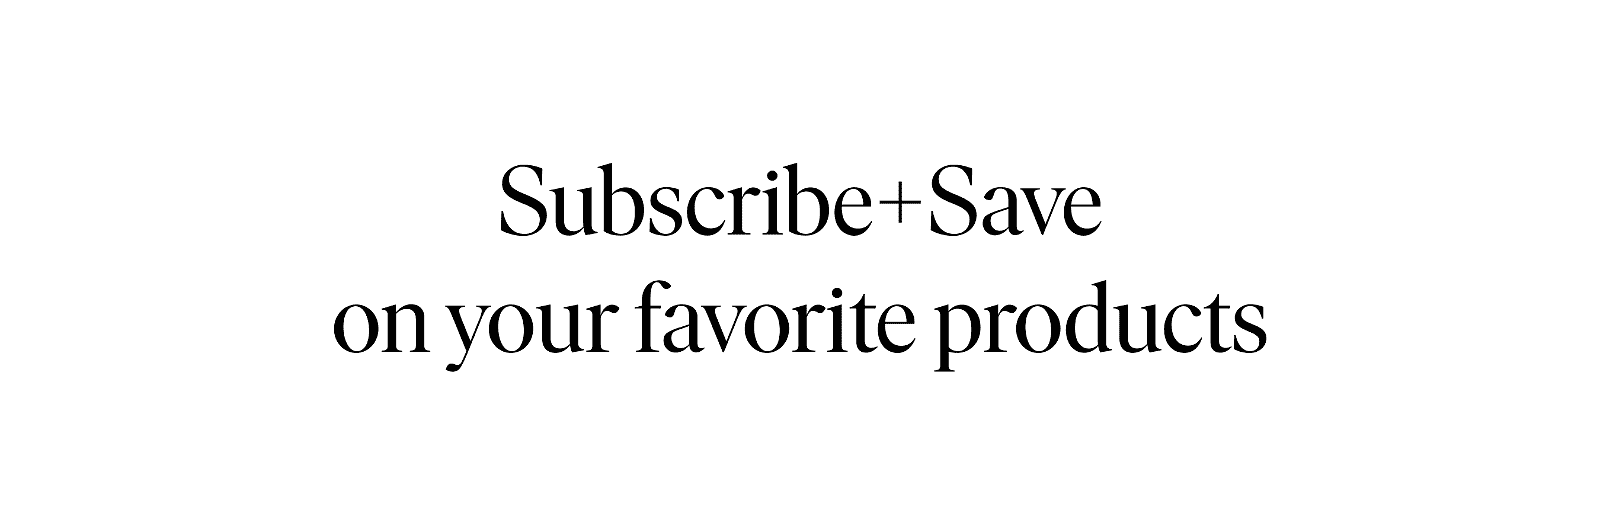 Subscribe + Save on your favorite products